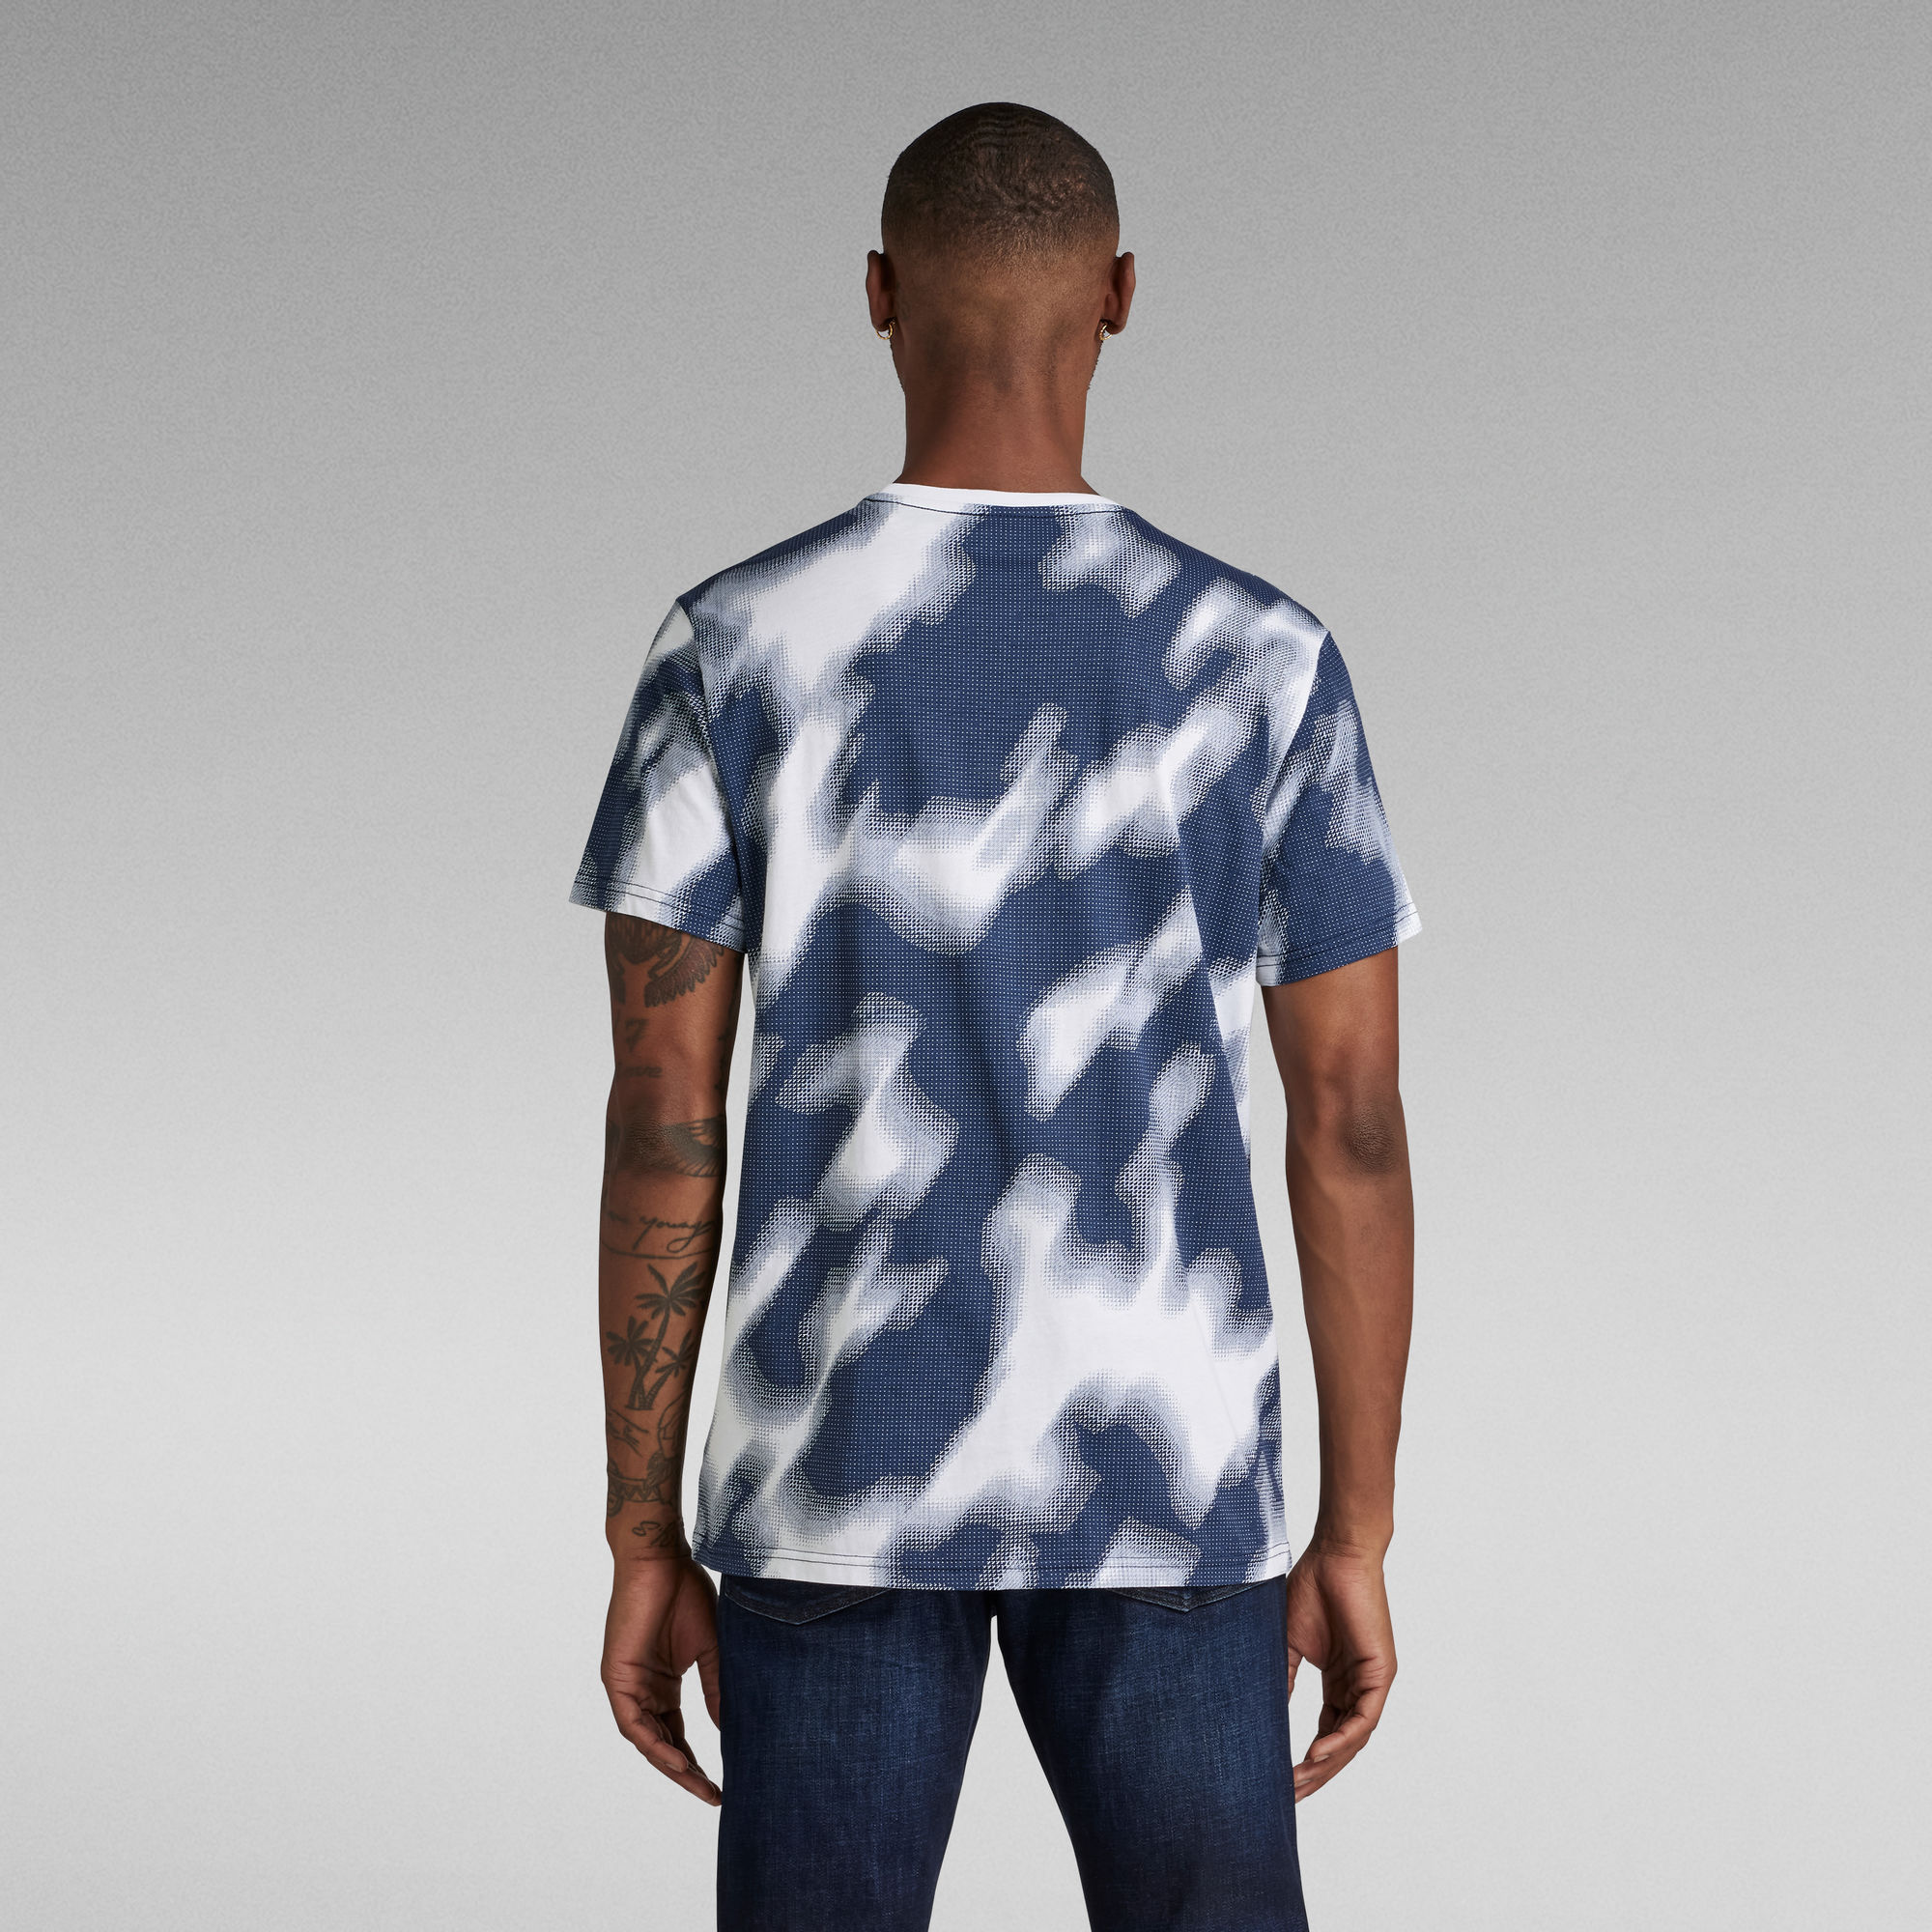 Faded Allover Print T-Shirt | Multi color | G-Star RAW®